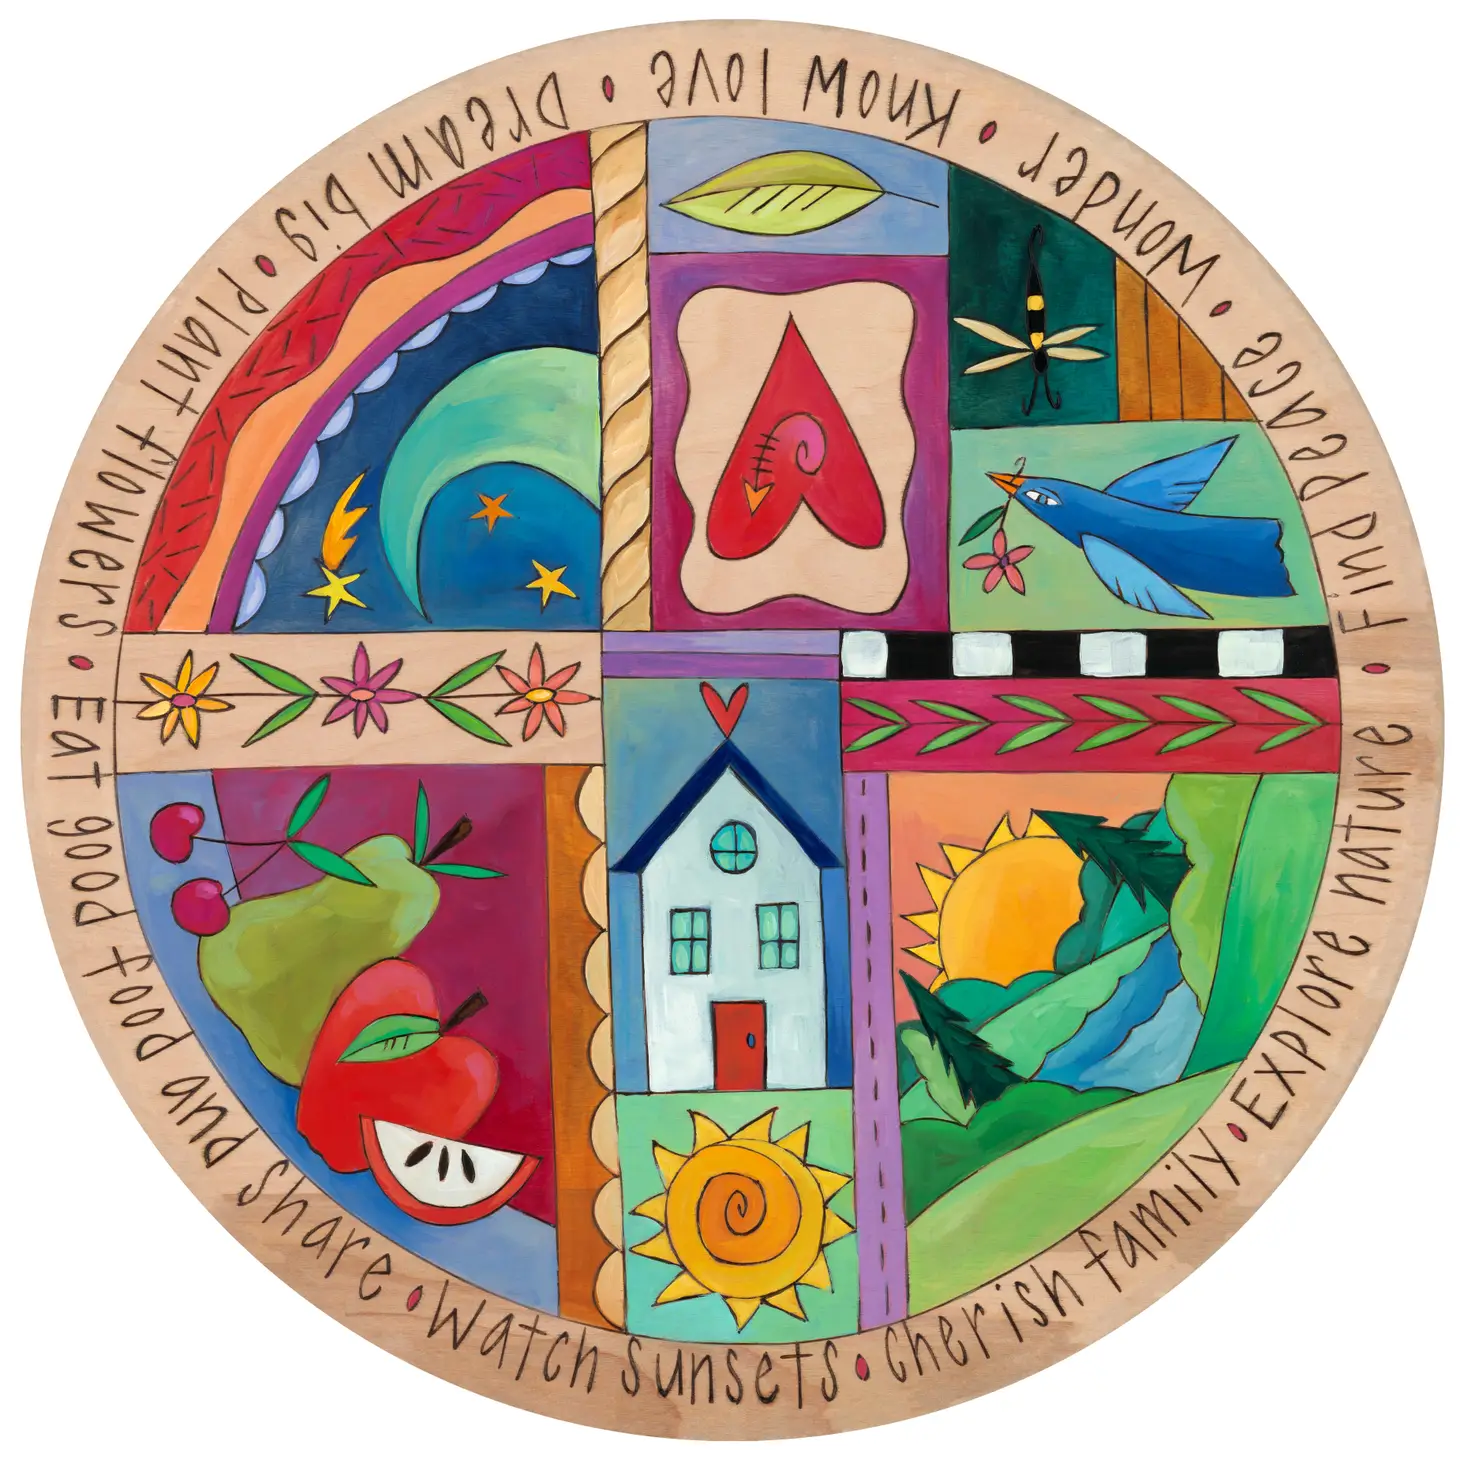 sincerely sticks lazy susan oh so sweet 18 inch art for the kitchen and table with sun, house, fruit, blue bird and words watch sunsets, cherish family, eat good food around the edge